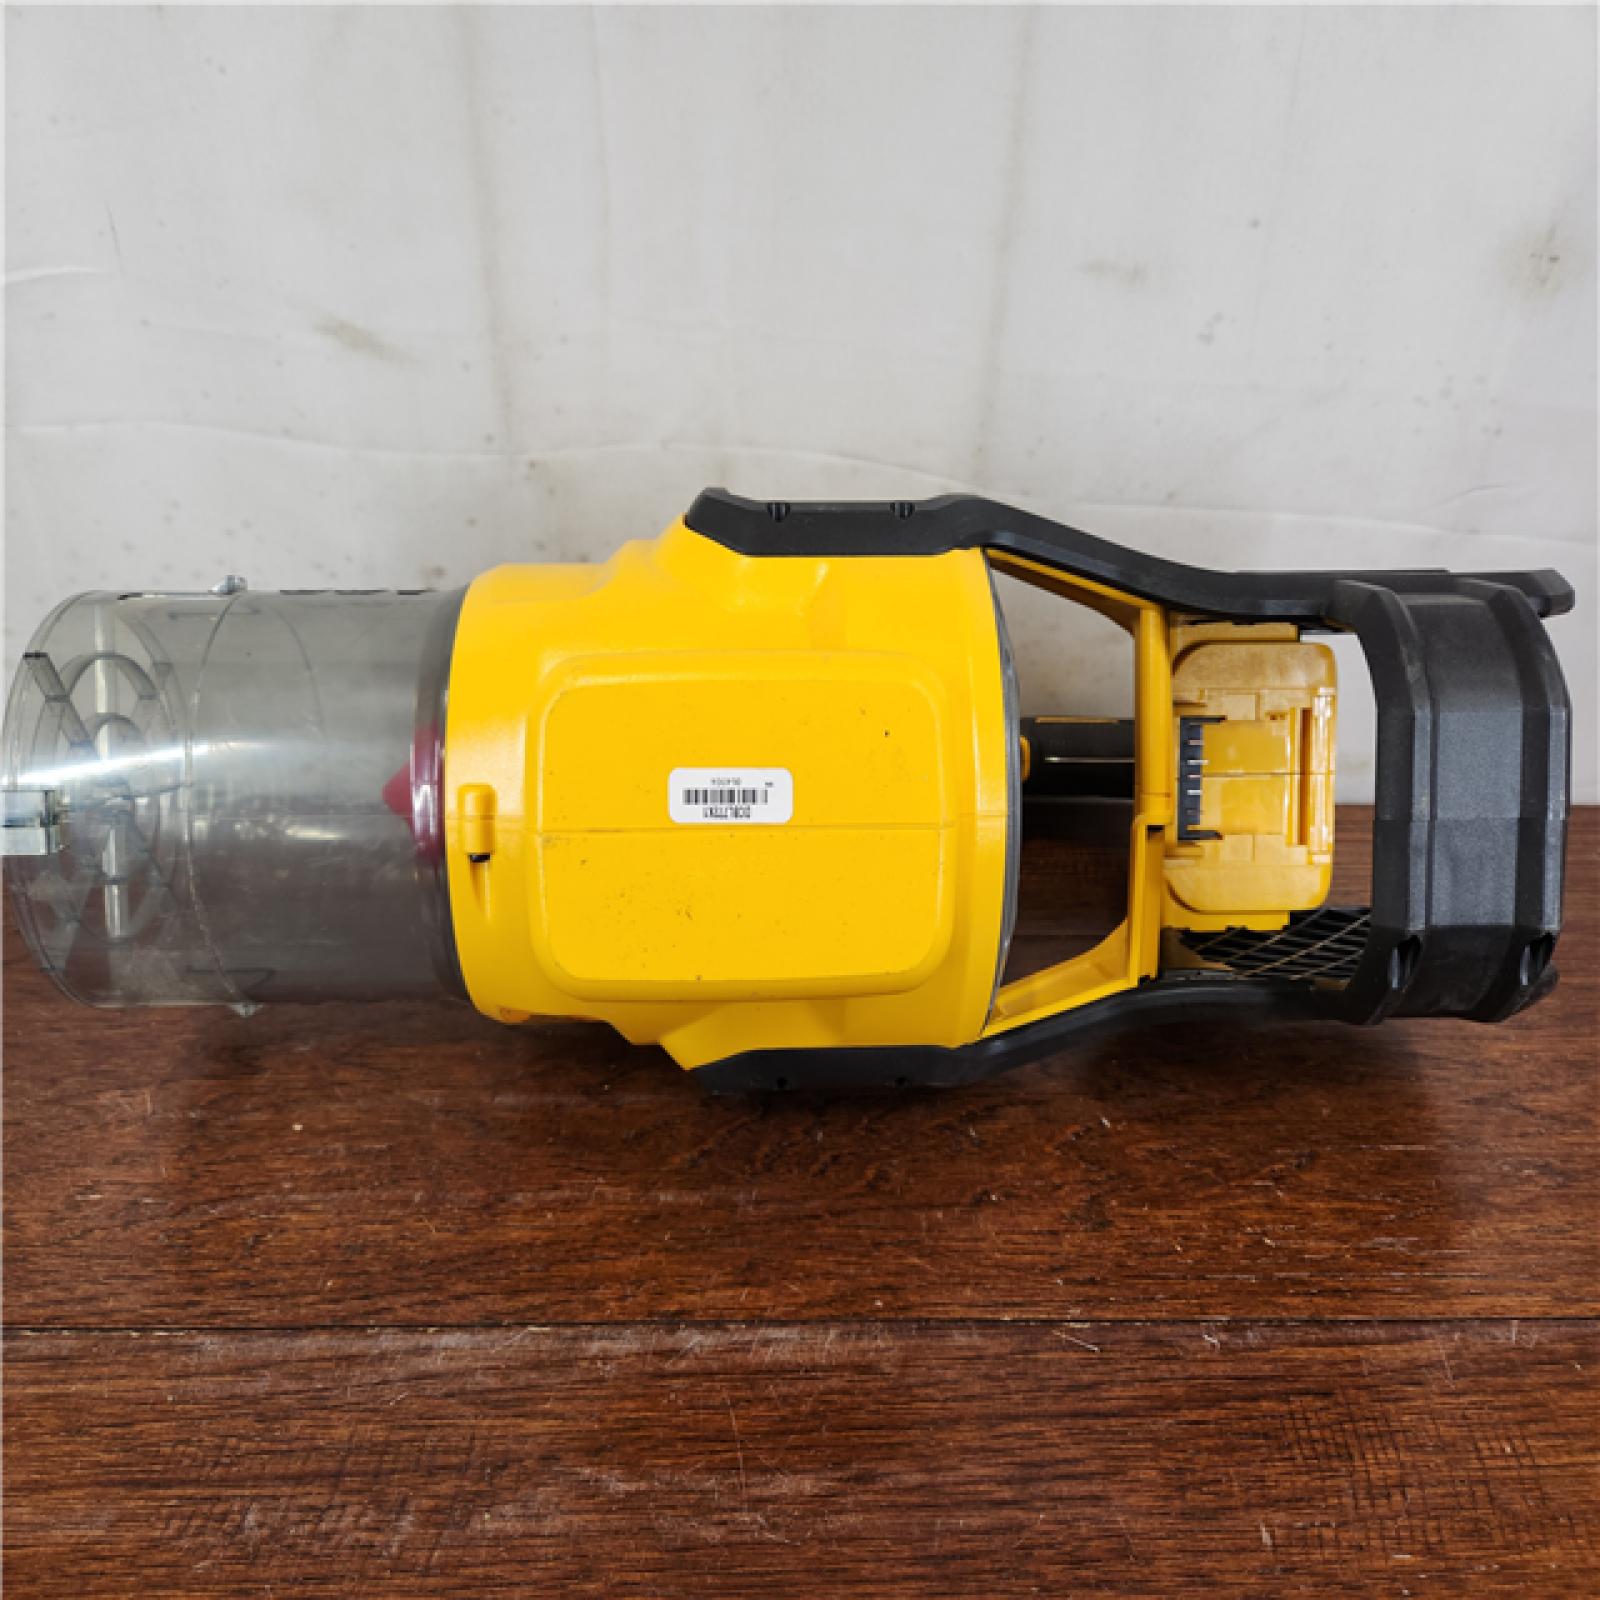 AS-IS Dewalt FLEXVOLT 60V MAX Lithium-Ion Brushless Cordless Axial Blower (Tool Only)